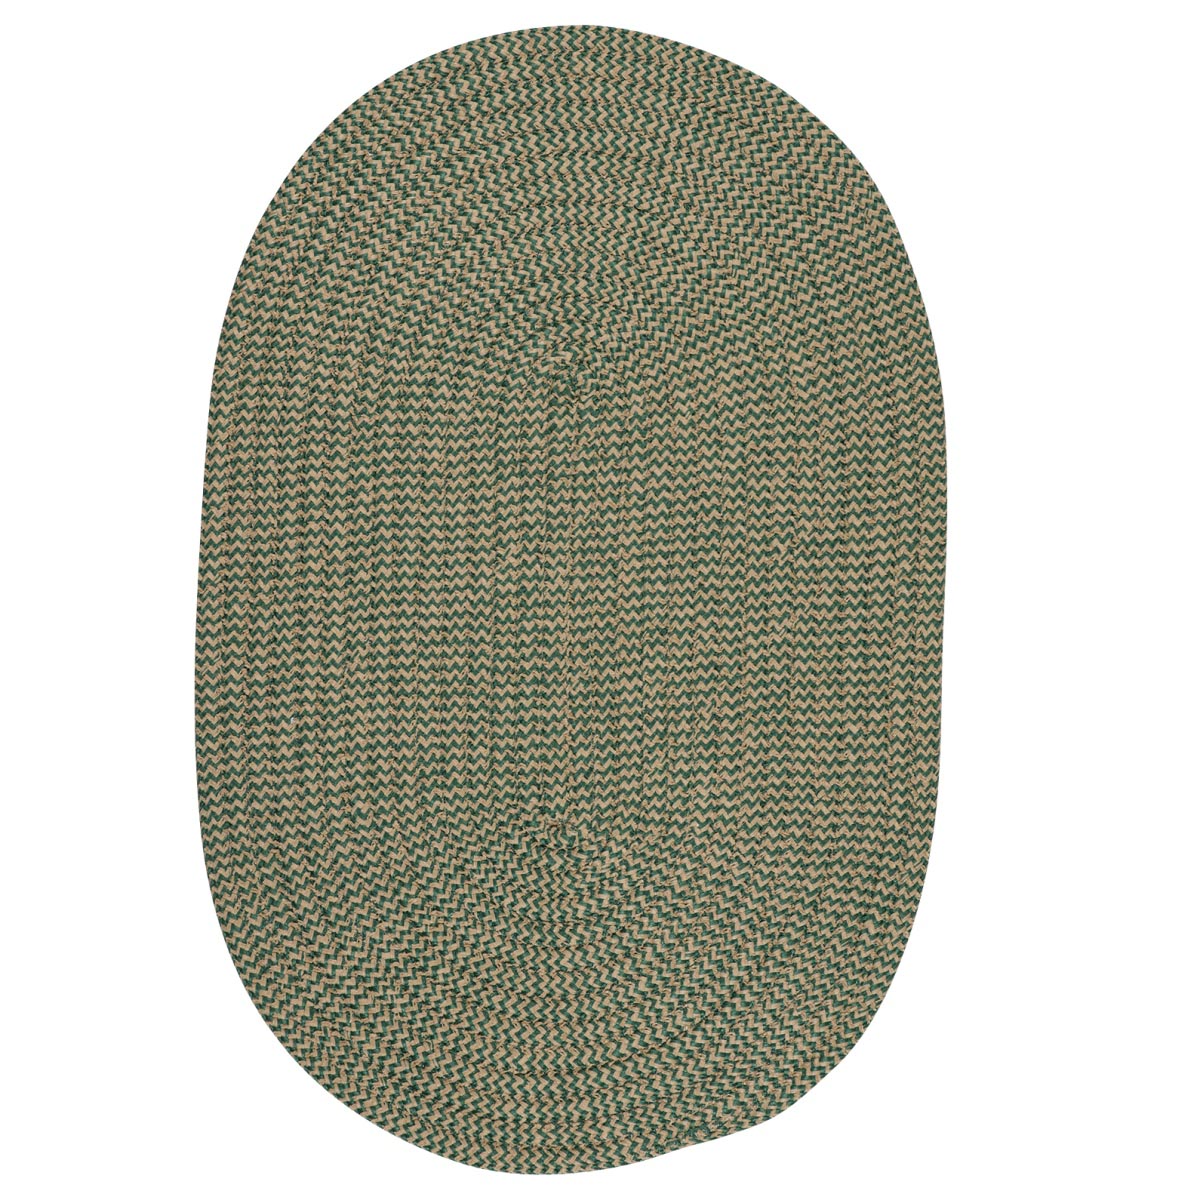 Softex Check Myrtle Green Check Outdoor Braided Oval Rugs